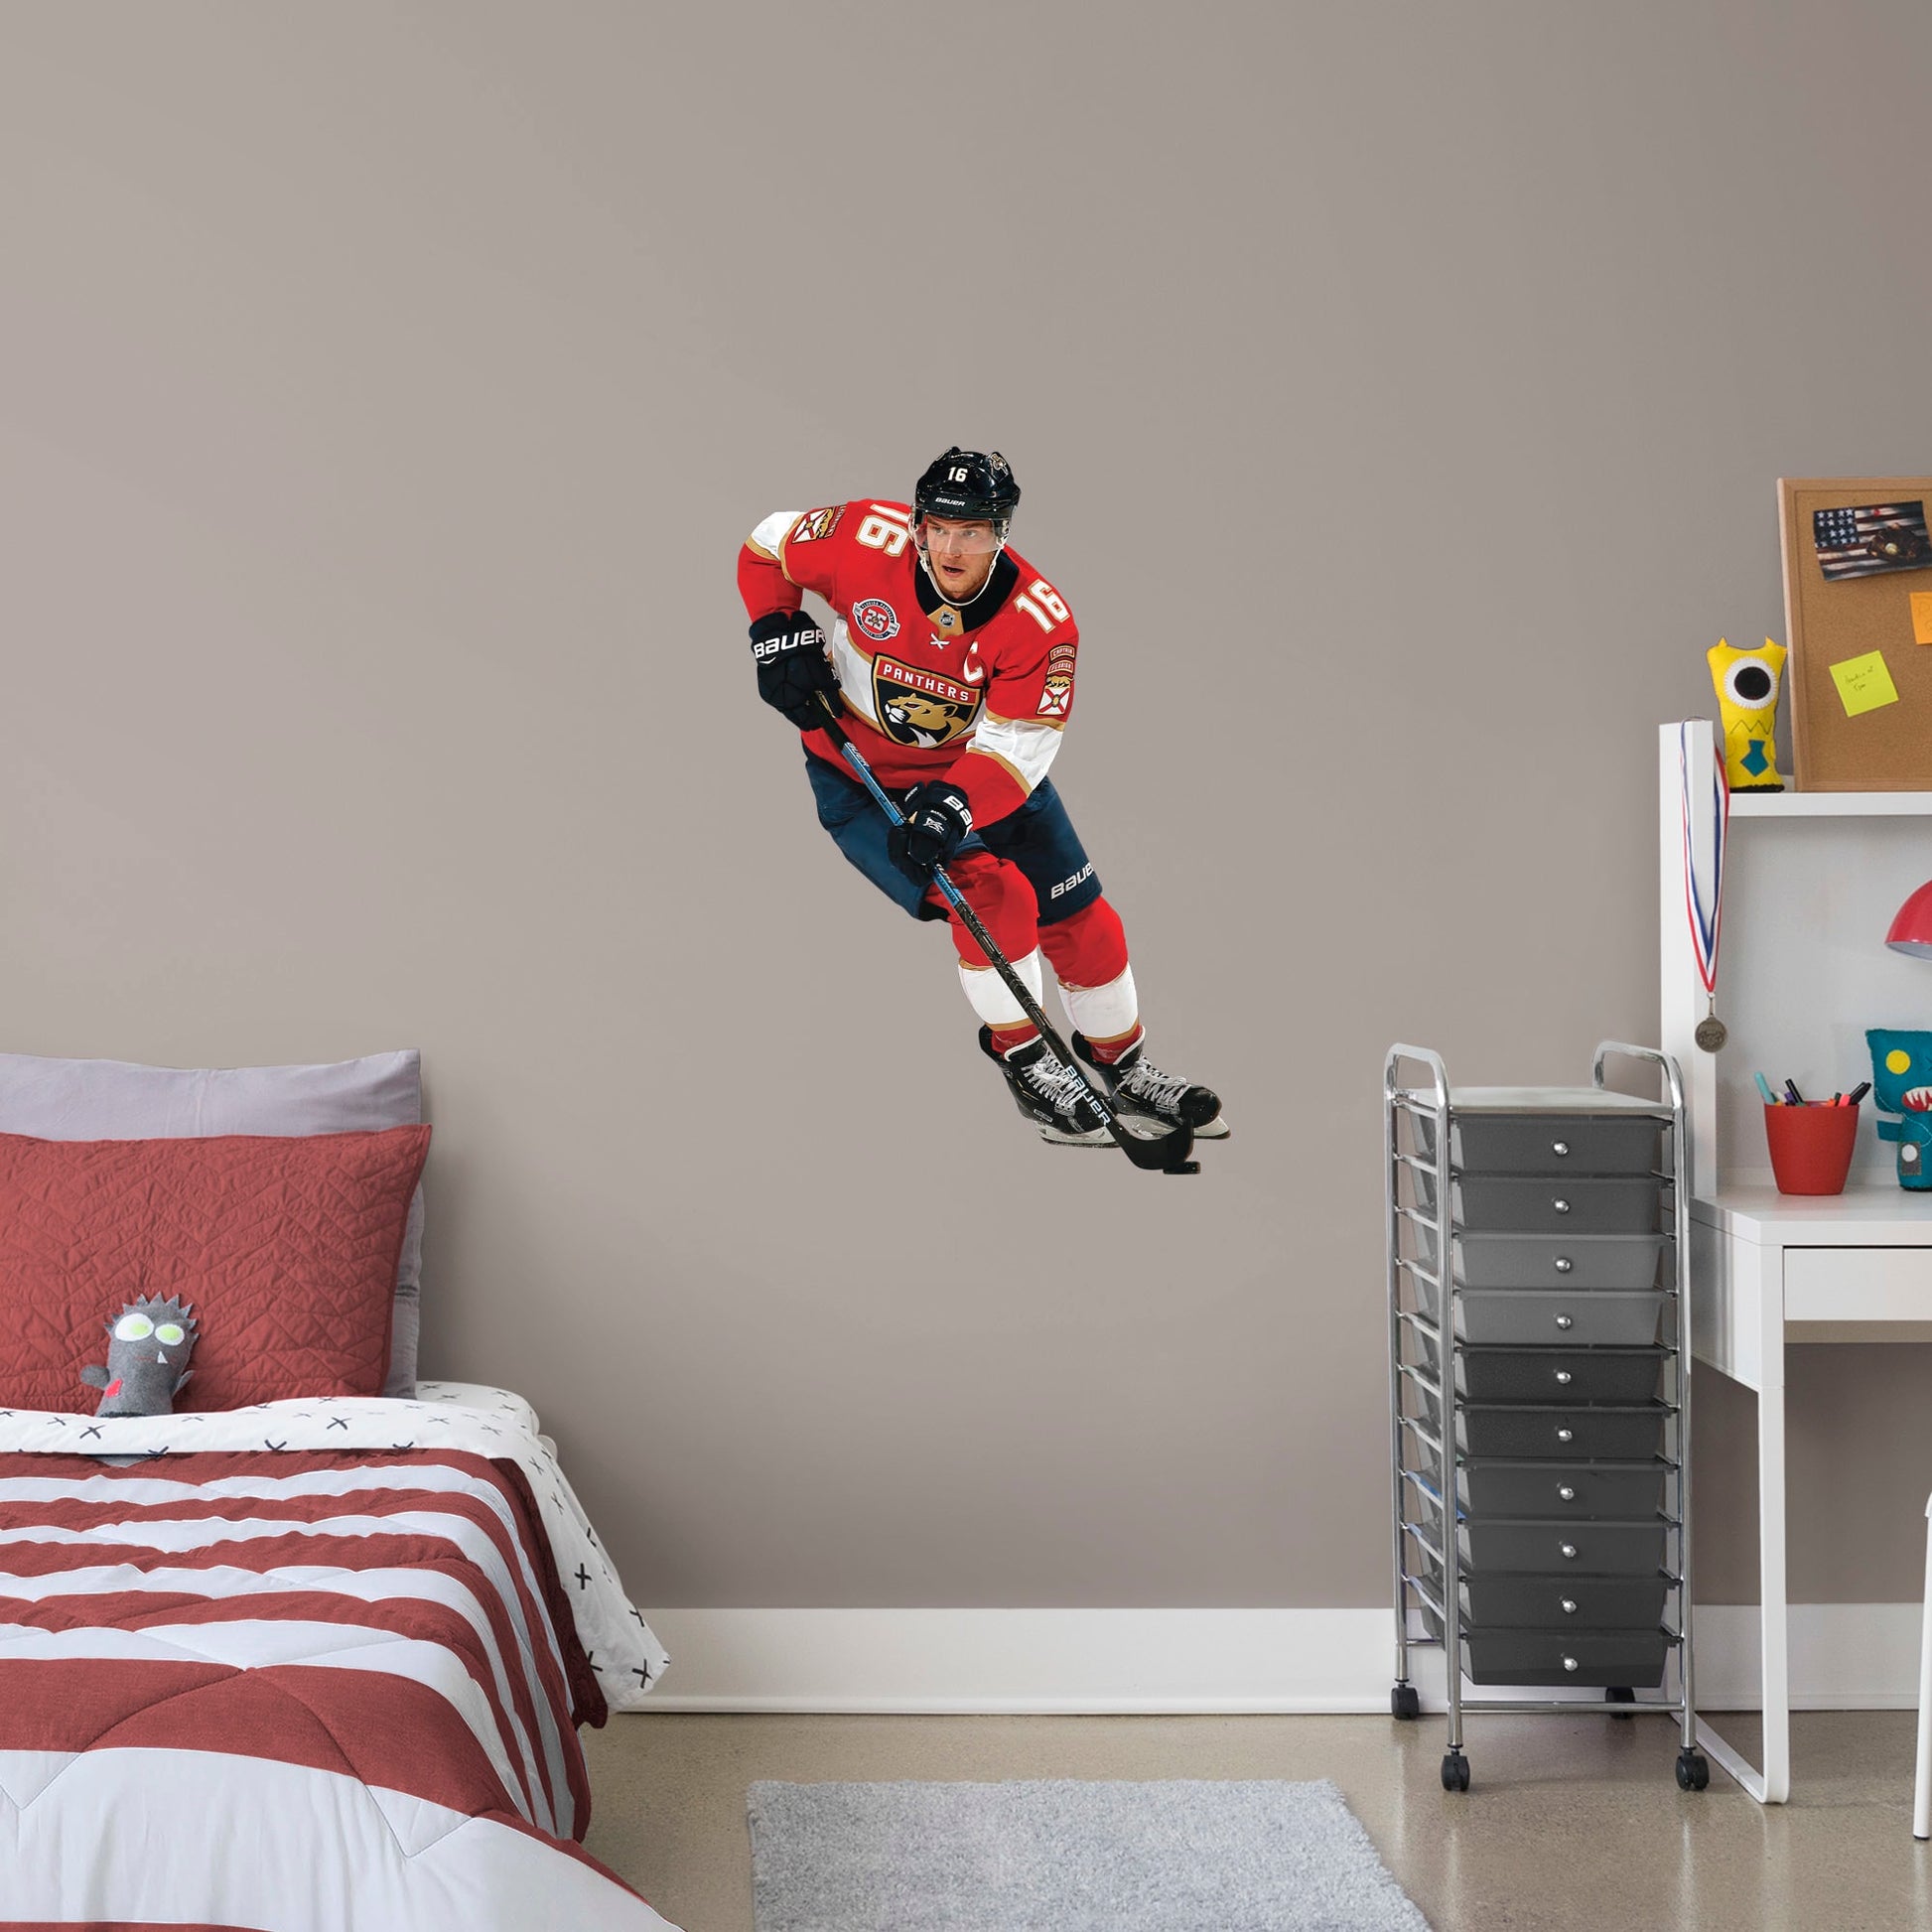 Life-Size Athlete + 2 Team Decals (51"W x 75"H) NHL fans and Panthers fanatics alike love Aleksander Barkov, the clutch captain from Florida, and now you can bring his skill to life in your own home! Seen here in action on the ice, this durable and bold wall decal will make the perfect addition to your bedroom, office, fan room, or any spot in your house! 